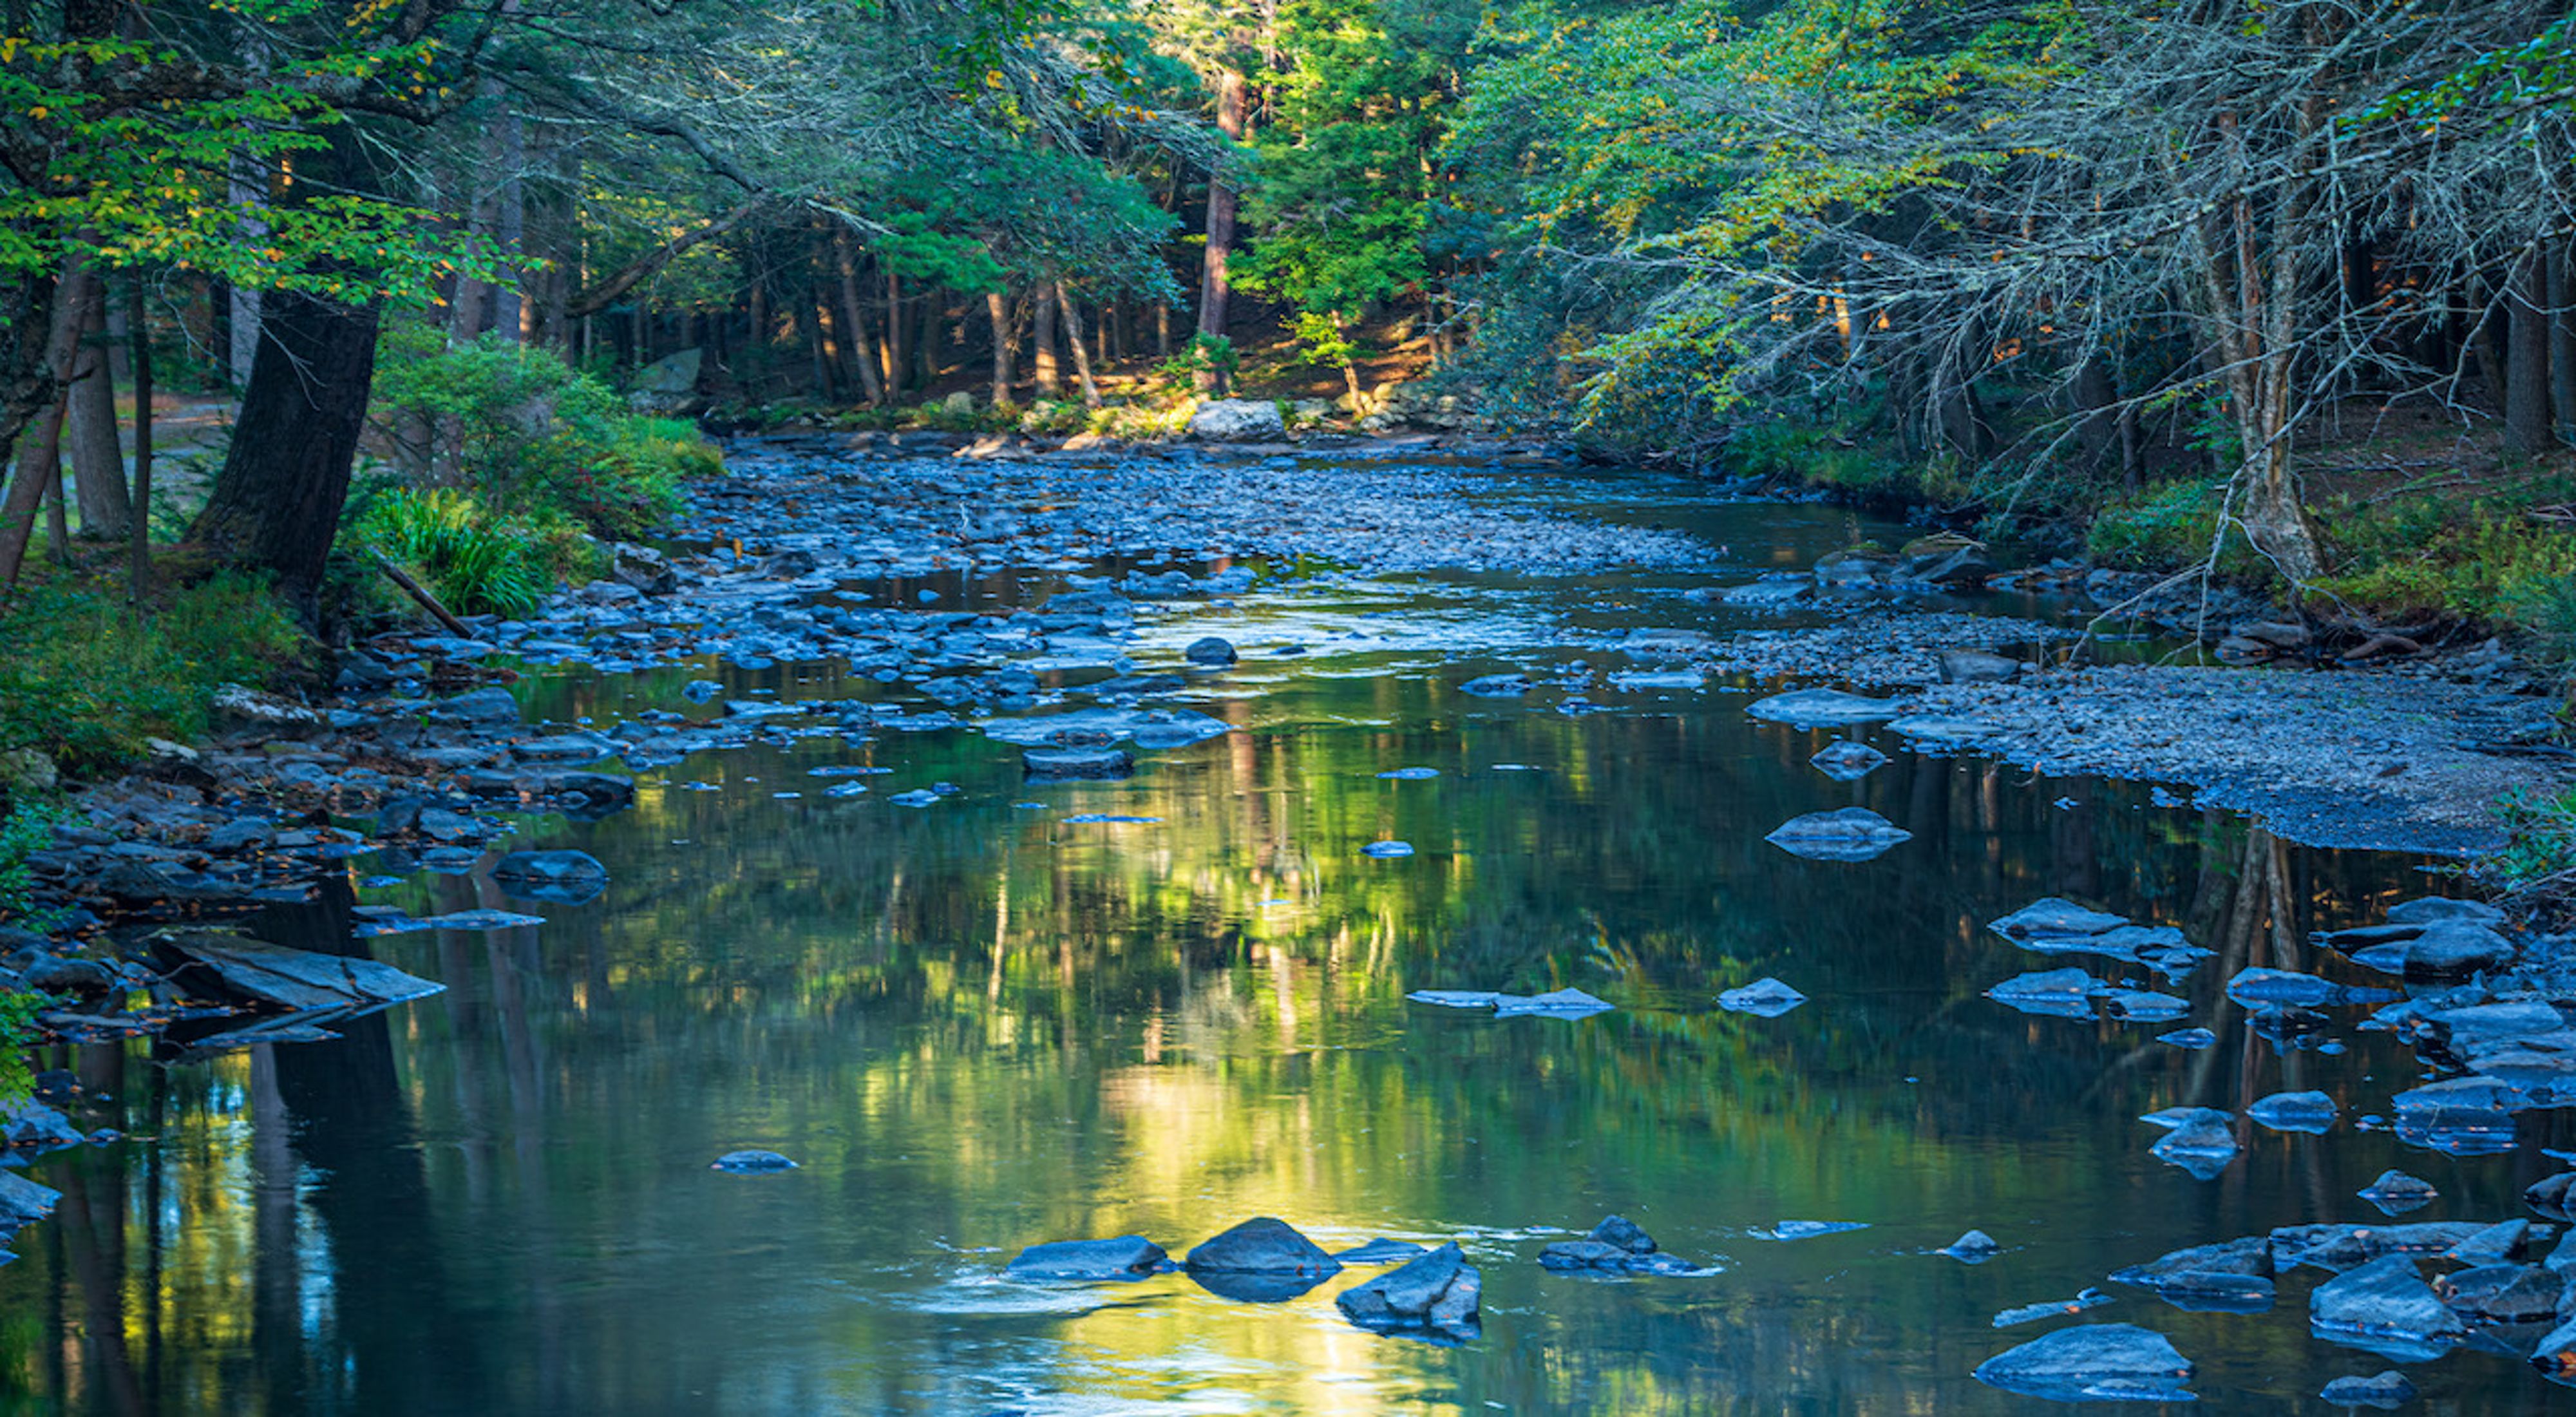 A creek flows through a wooded area surrounded by lush green trees.